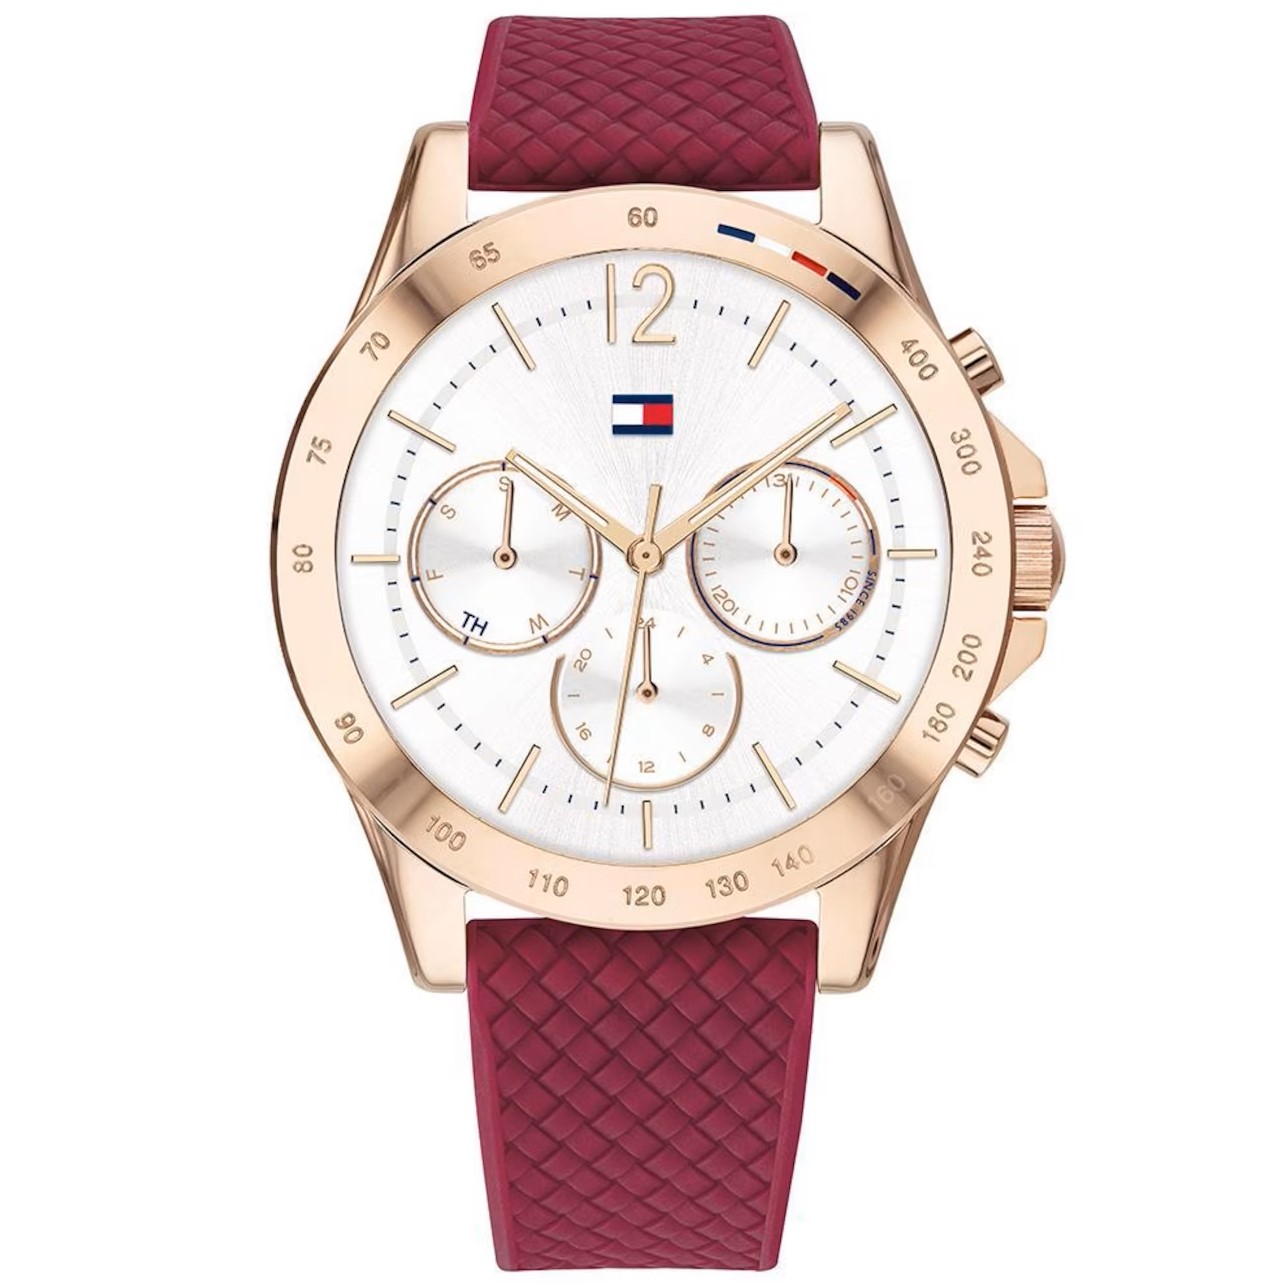 ĐỒNG HỒ ĐEO TAY NỮ TOMMY HILFIGER ROSE GOLD SPORT WATCH WITH RED SILICONE STRAP HAVEN ANALOG WATCH FOR WOMEN TH1782200W 2